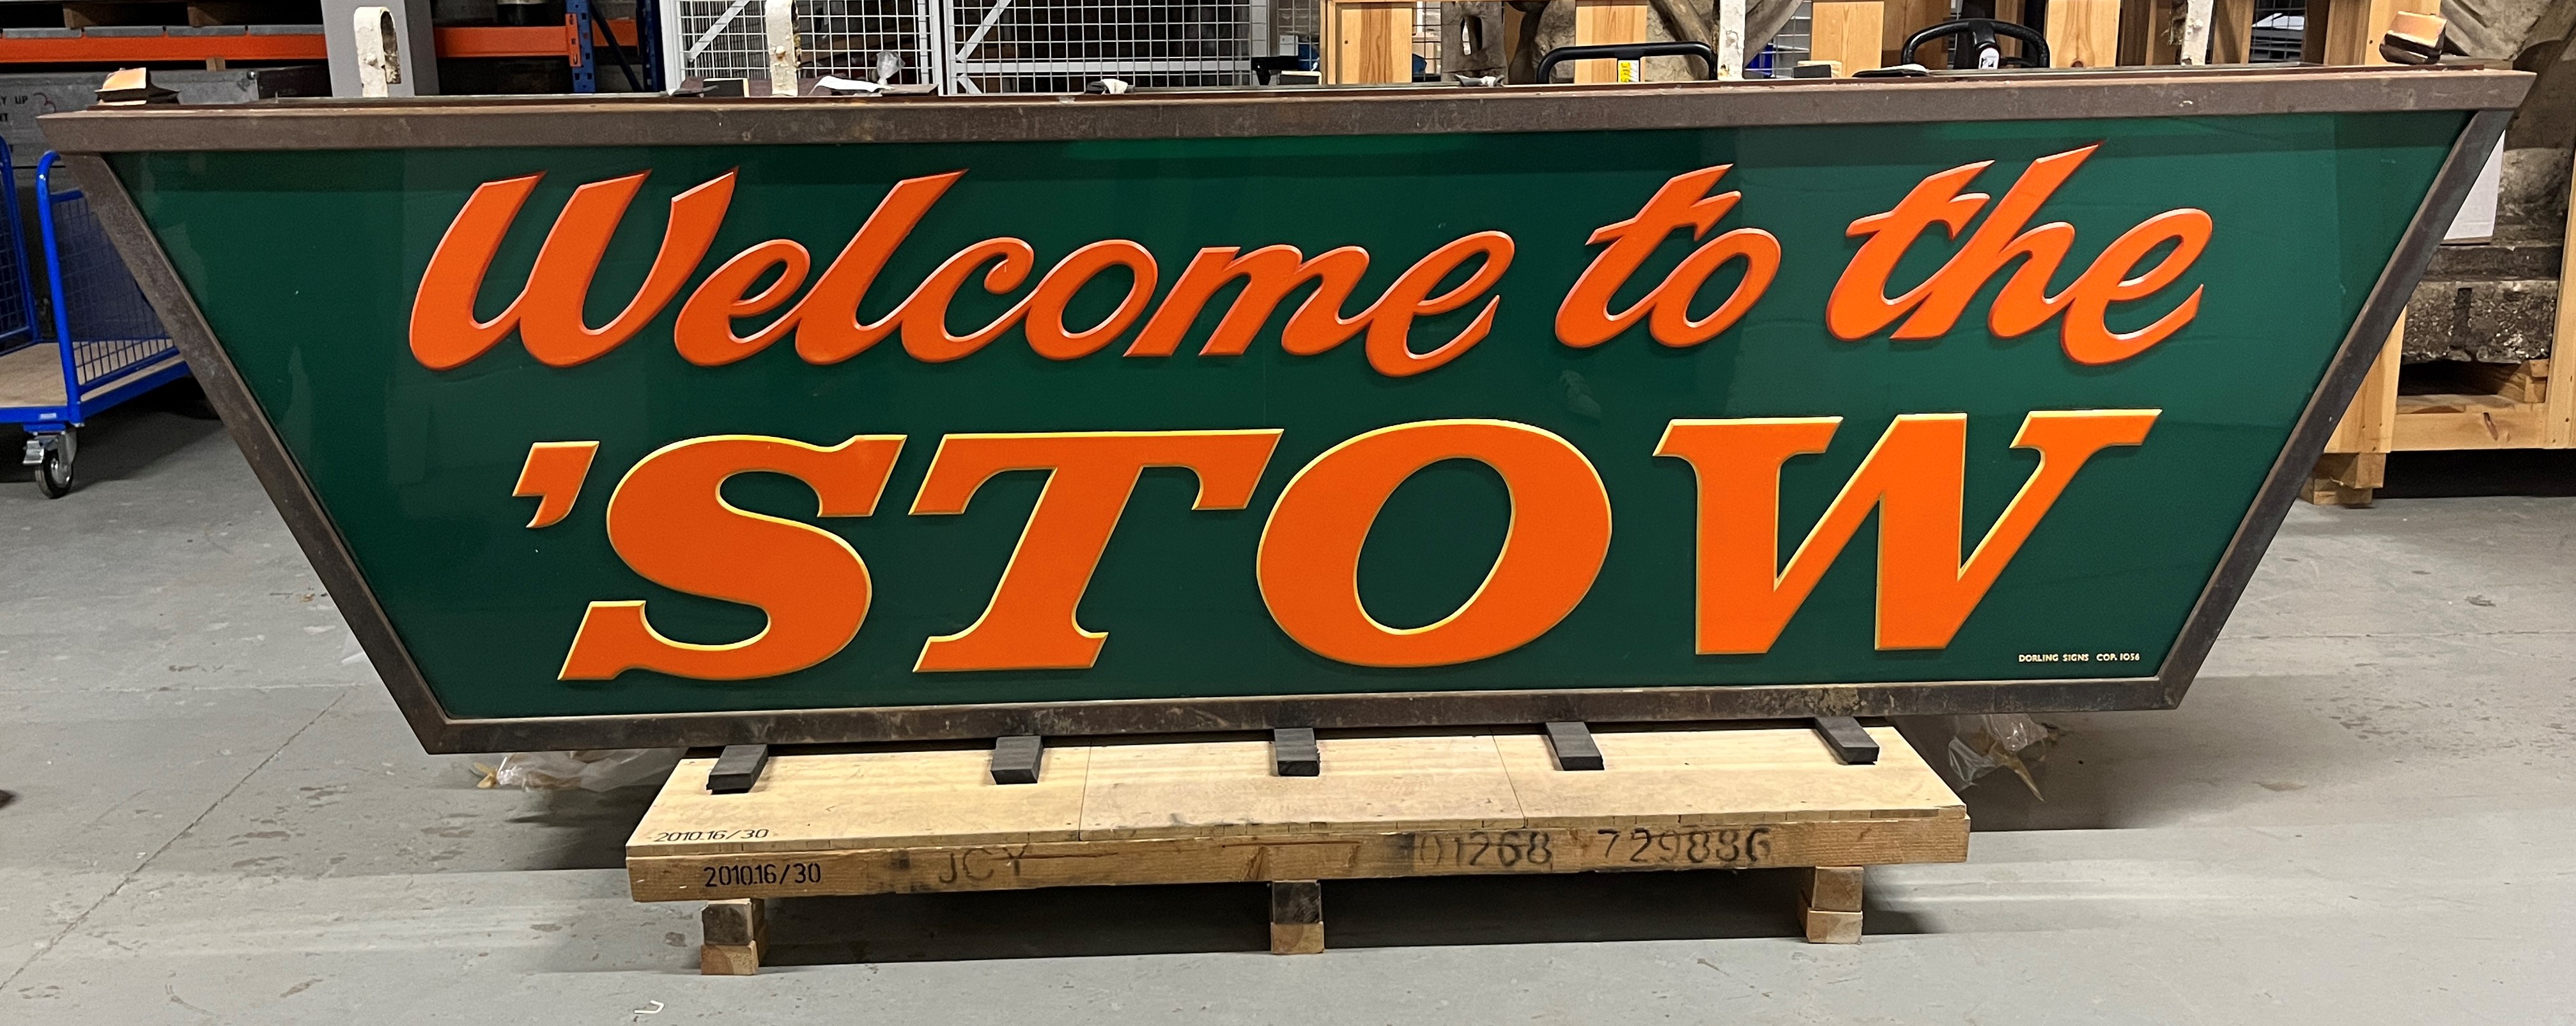 Welcome to the ‘Stow, sign from Walthamstow Stadium, c. 1970-1990, previously hung at the entrance to the dog racing track (c) Museum of London.jpg